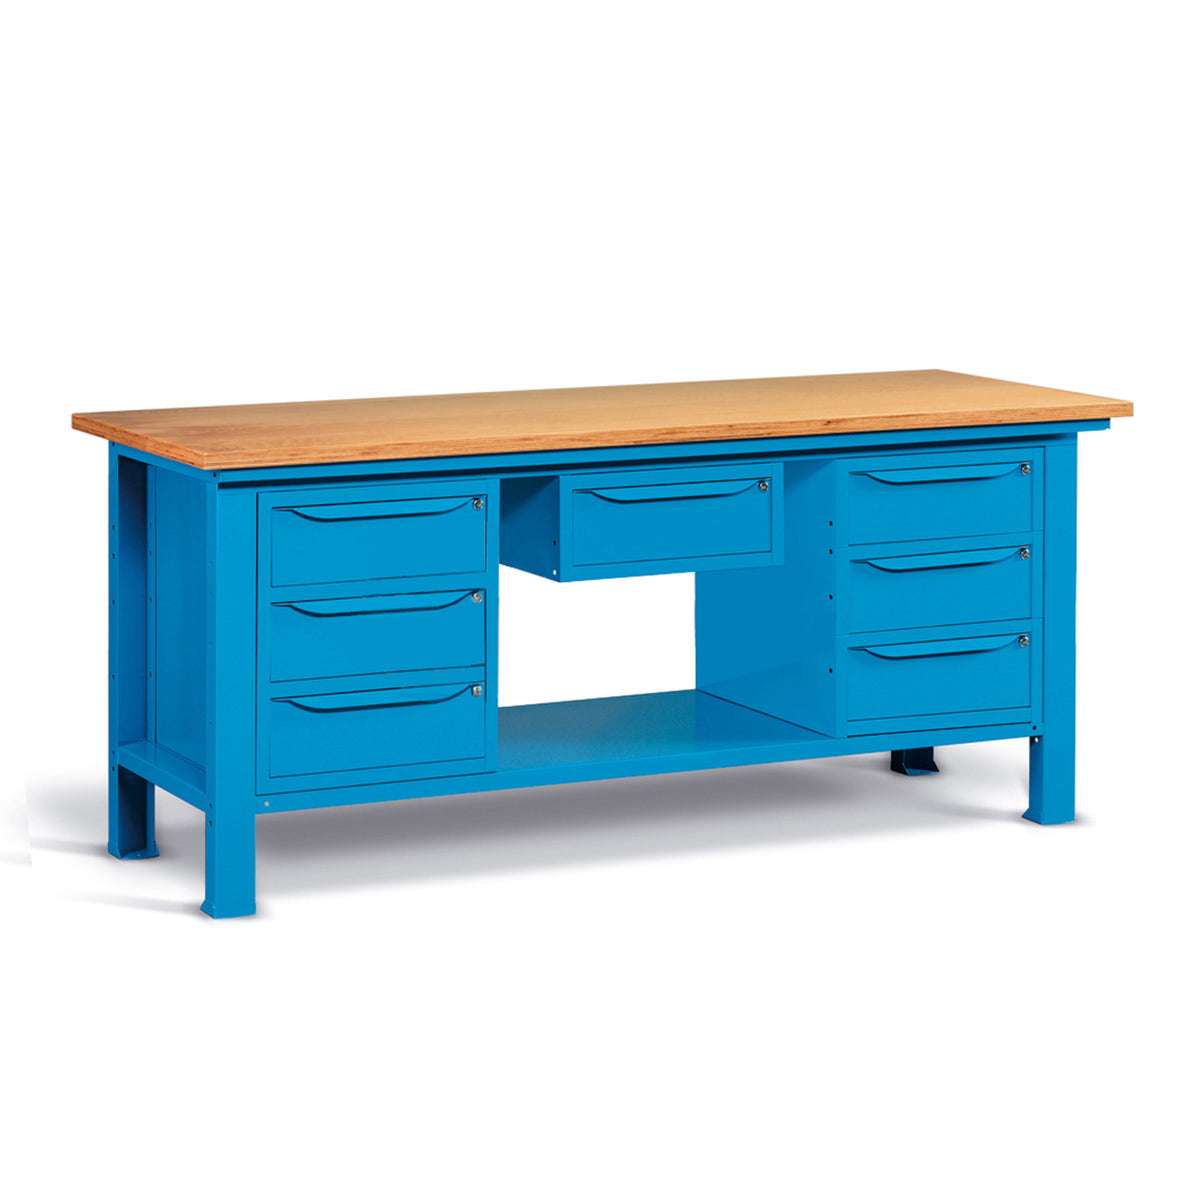 WORKSHOP WORKBENCH WOODEN TOP 2000 X 750 X 880 H - 2 CABINETS 3 DRAWERS + 1 CABINET 1 DRAWER - FAMI - BLUE